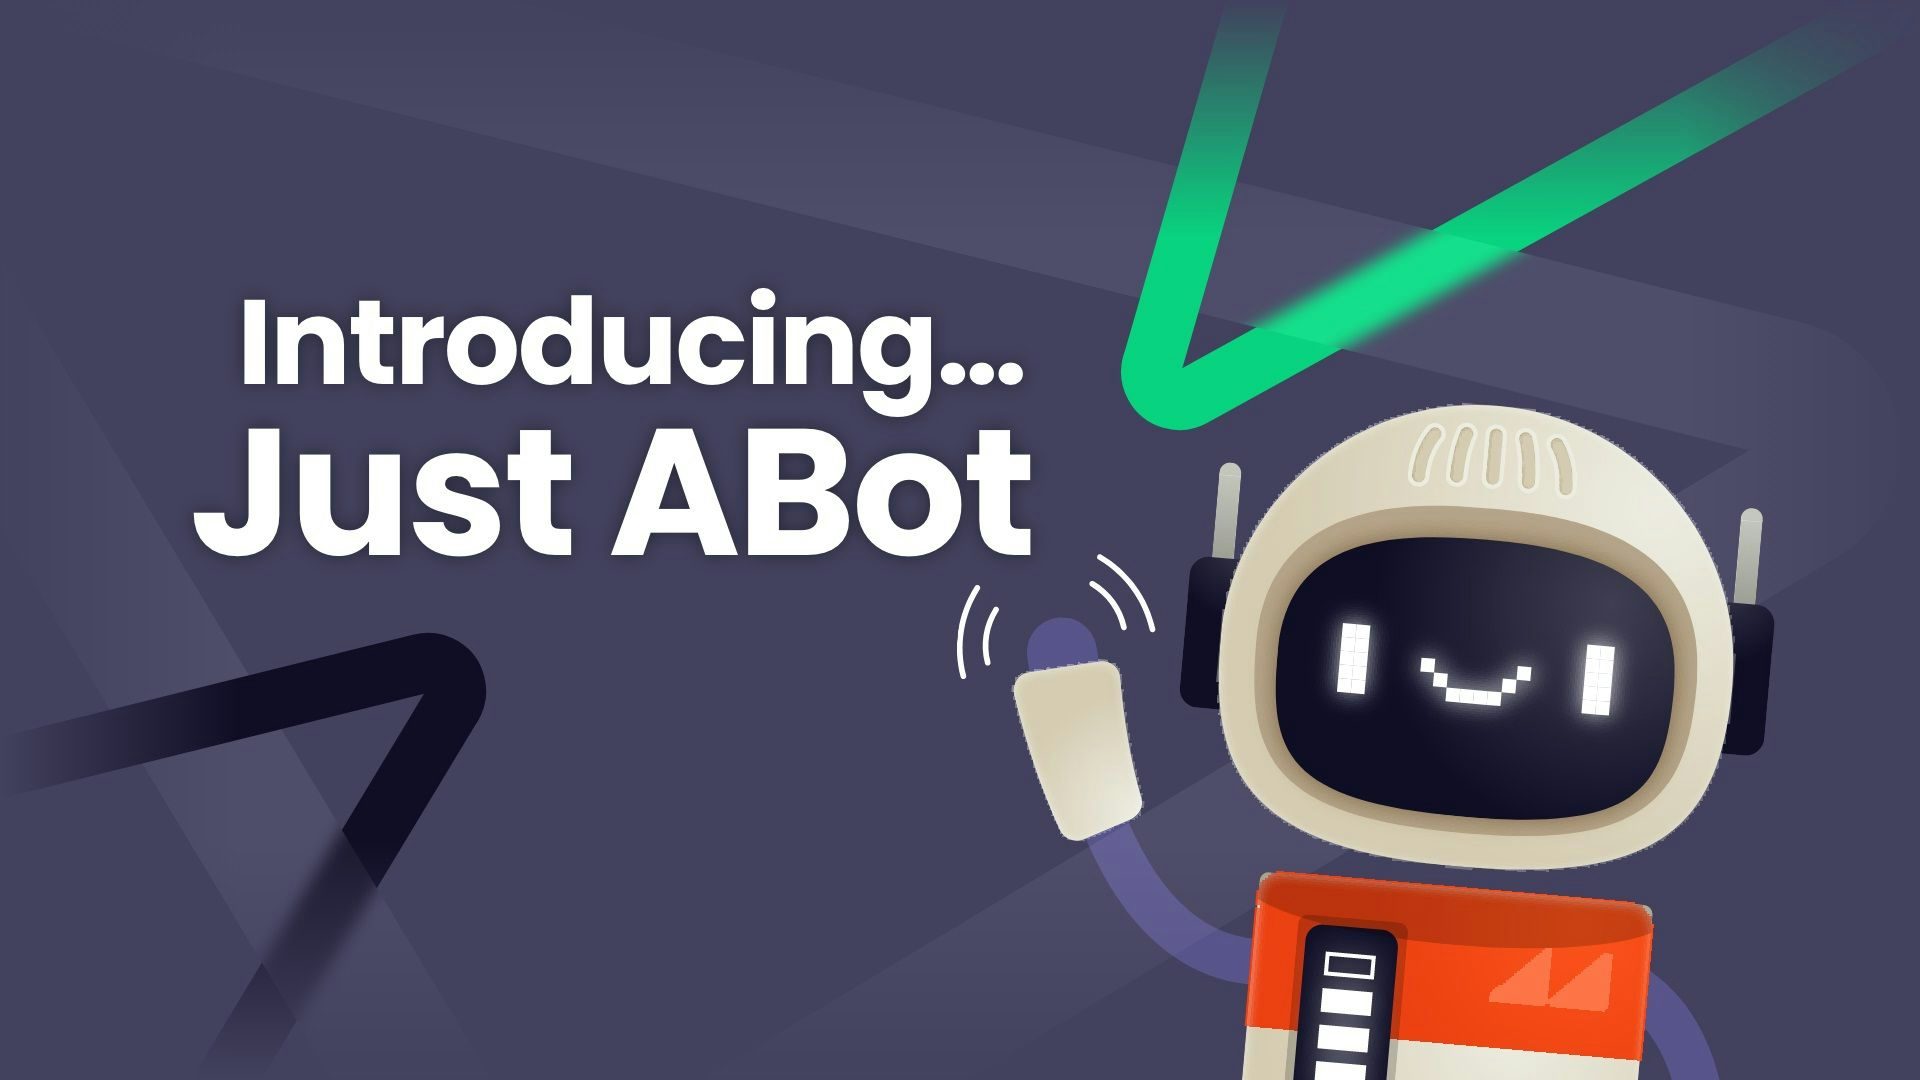 Introducing Just ABot!